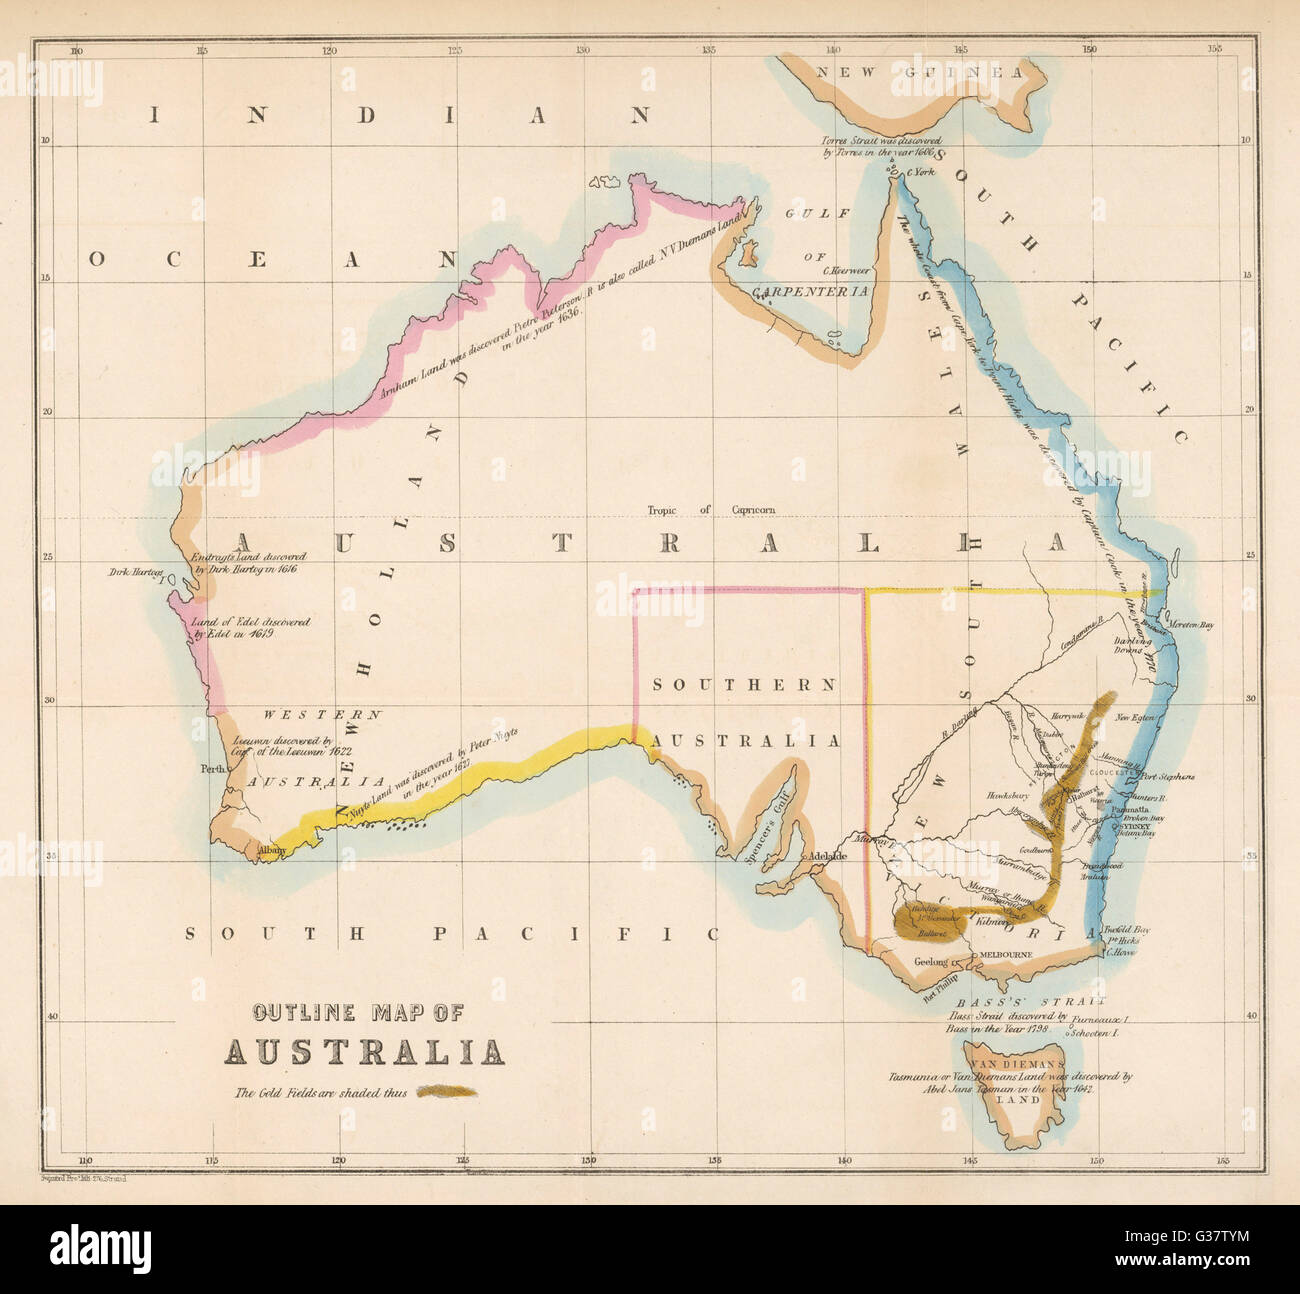 Map showing the location of the GOLDFIELDS, so presumably made fairly soon  after the start of the Australian Gold Rush in 1851 Date: 1850s Stock Photo  - Alamy